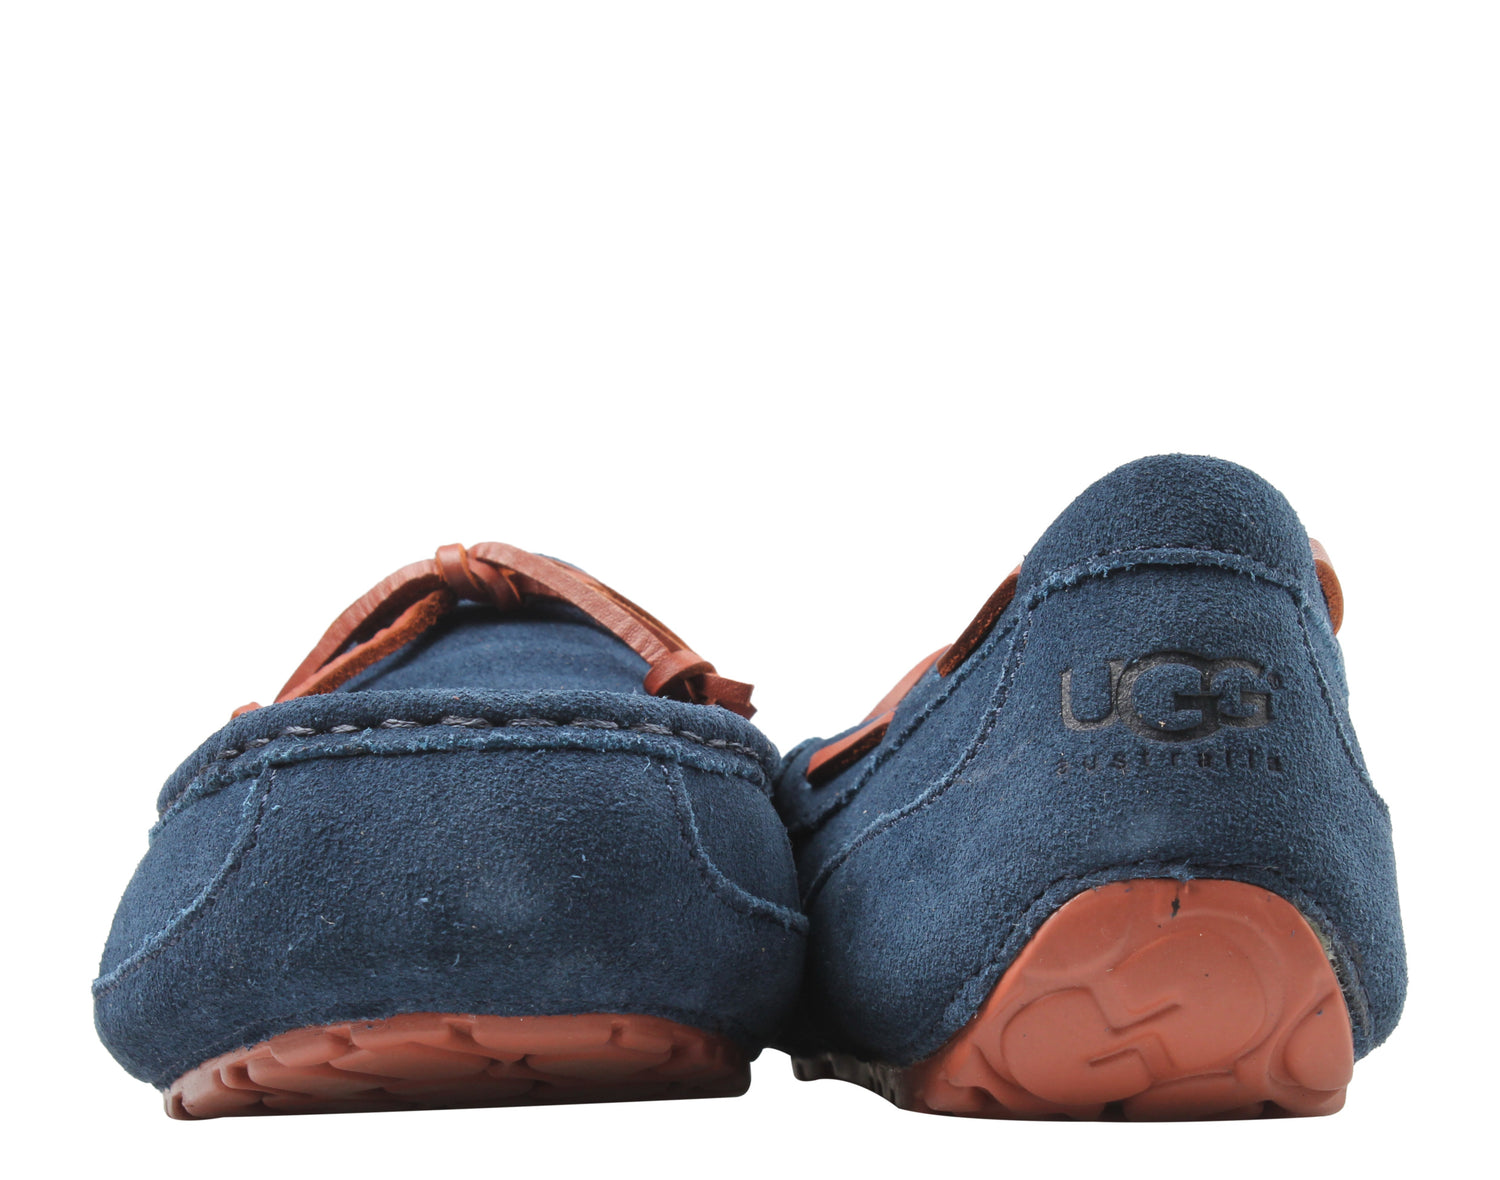 UGG Australia Chester Men's Casual Loafer Shoes